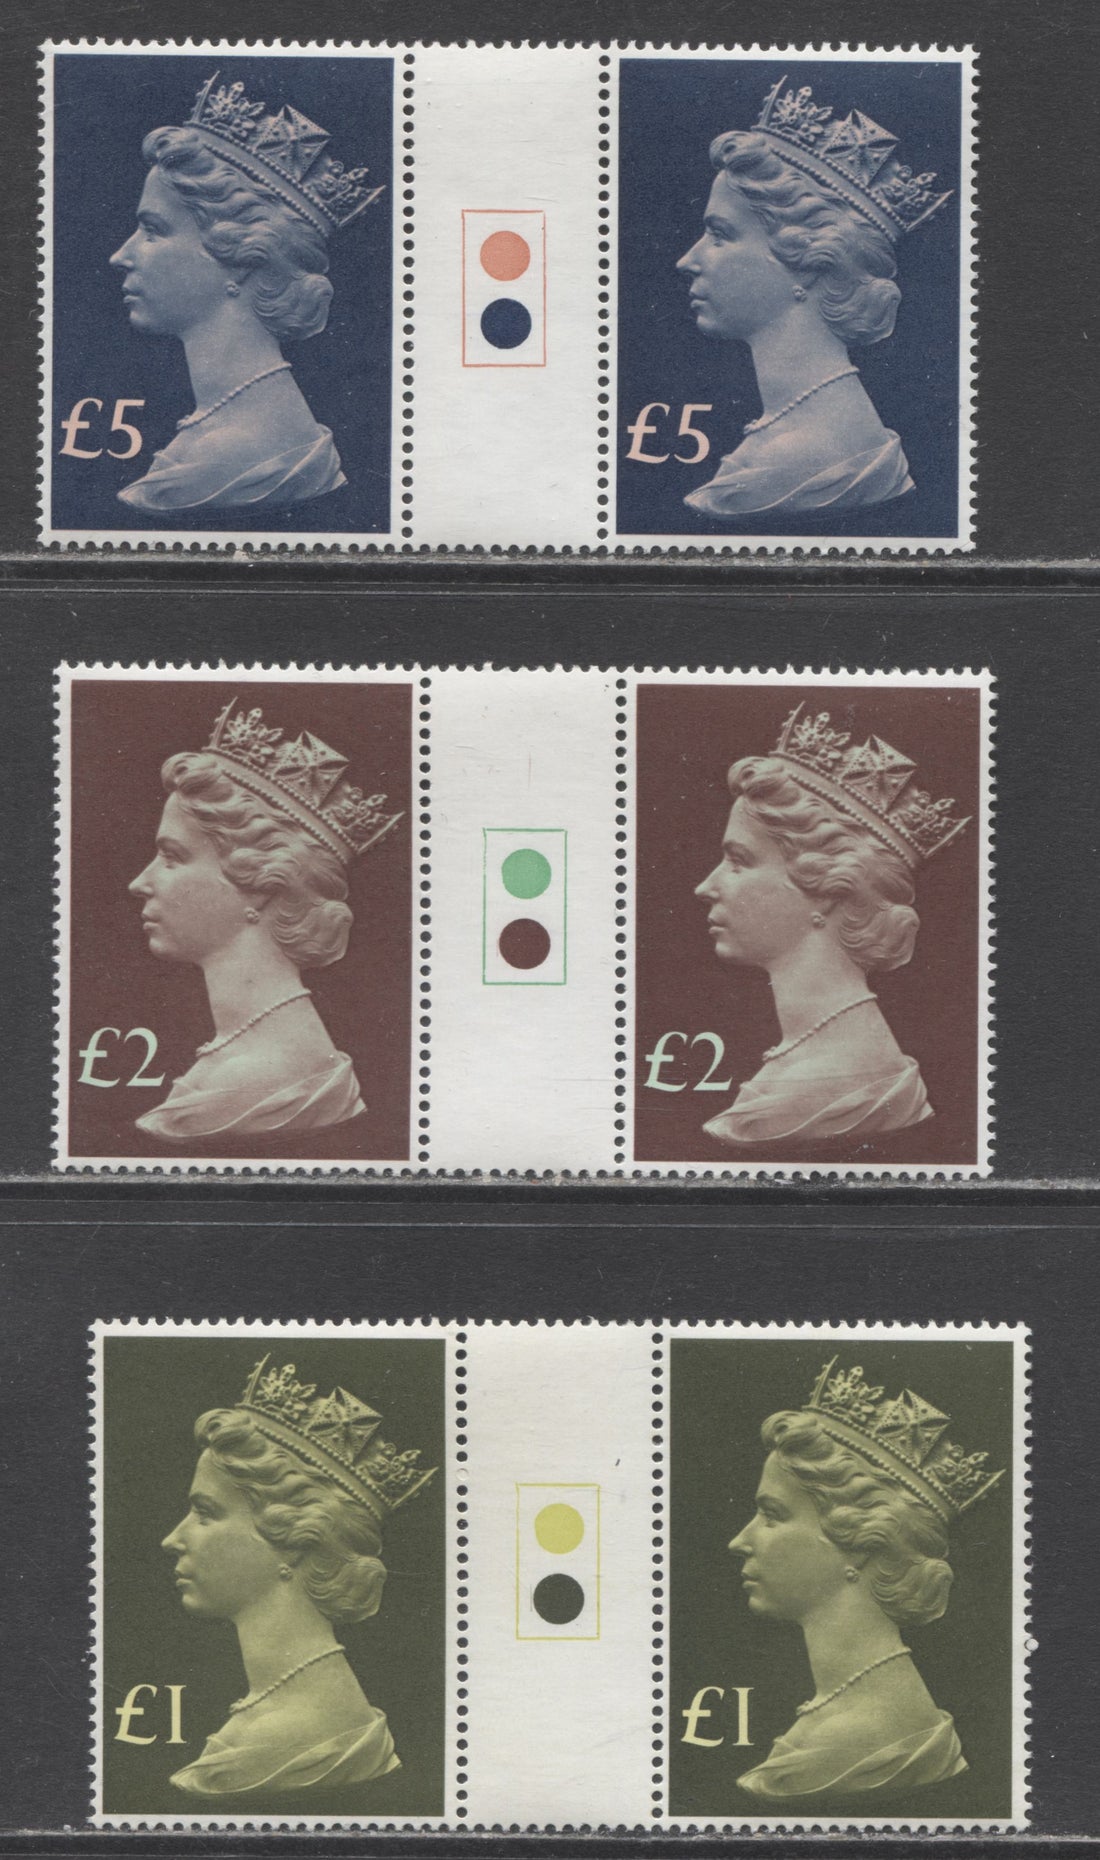 Making Sense of the Decimal Machins: The Iconic Definitives of Great Britain - 1971-2022